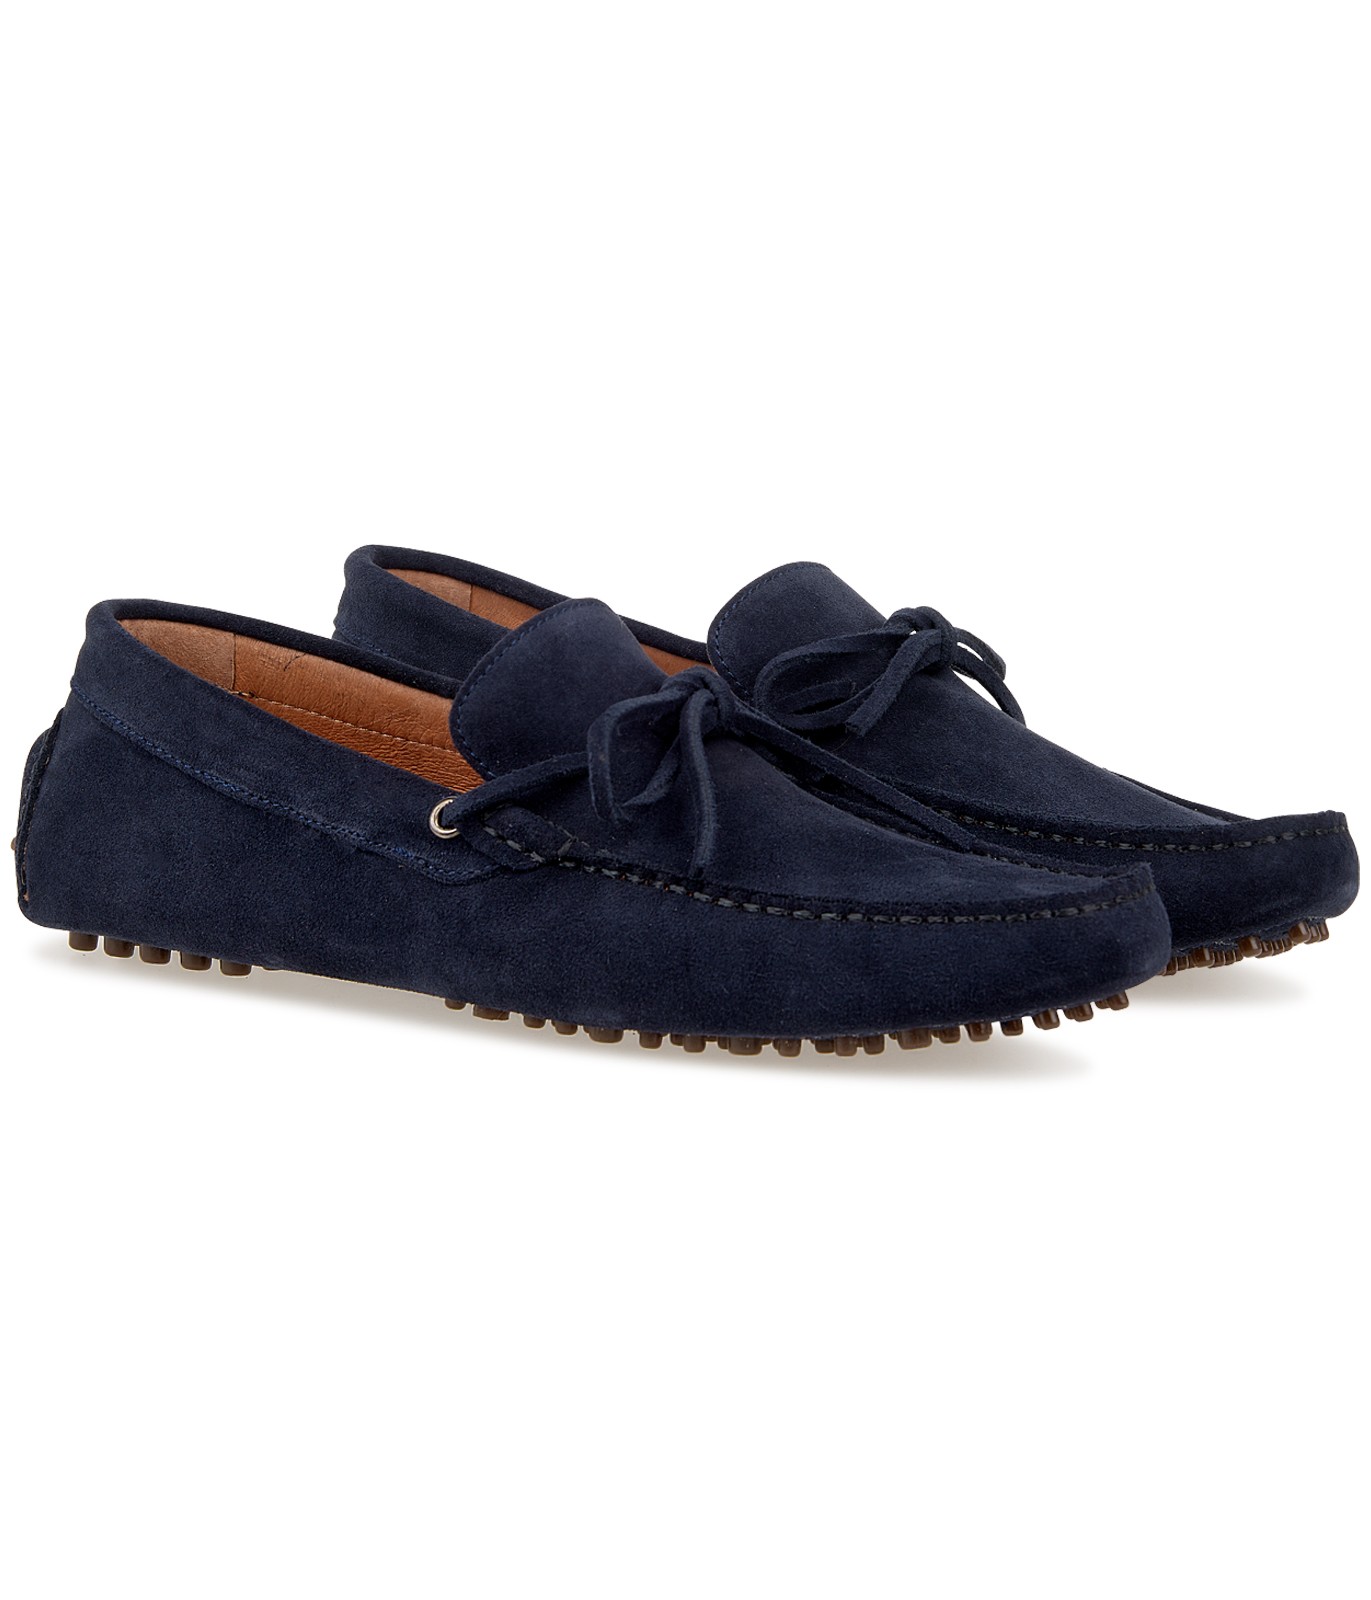 ros Give Mania MILANO - Navy blue suede calfskin loafers | Quality brand Europann